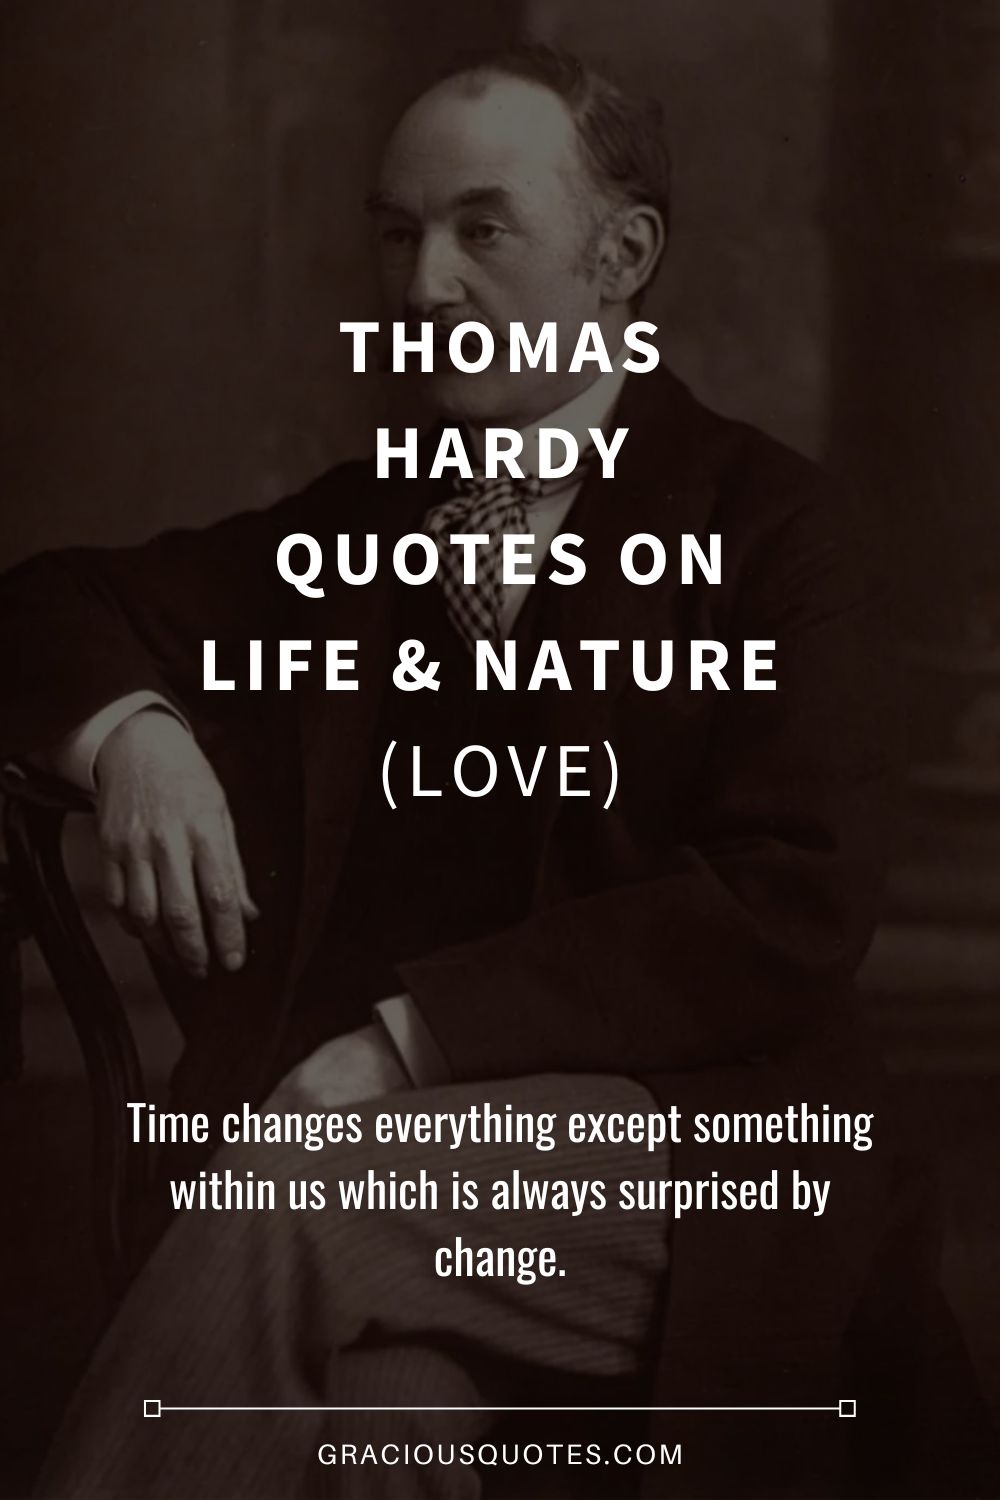 Thomas Hardy Quotes on Life & Nature (LOVE) - Gracious Quotes